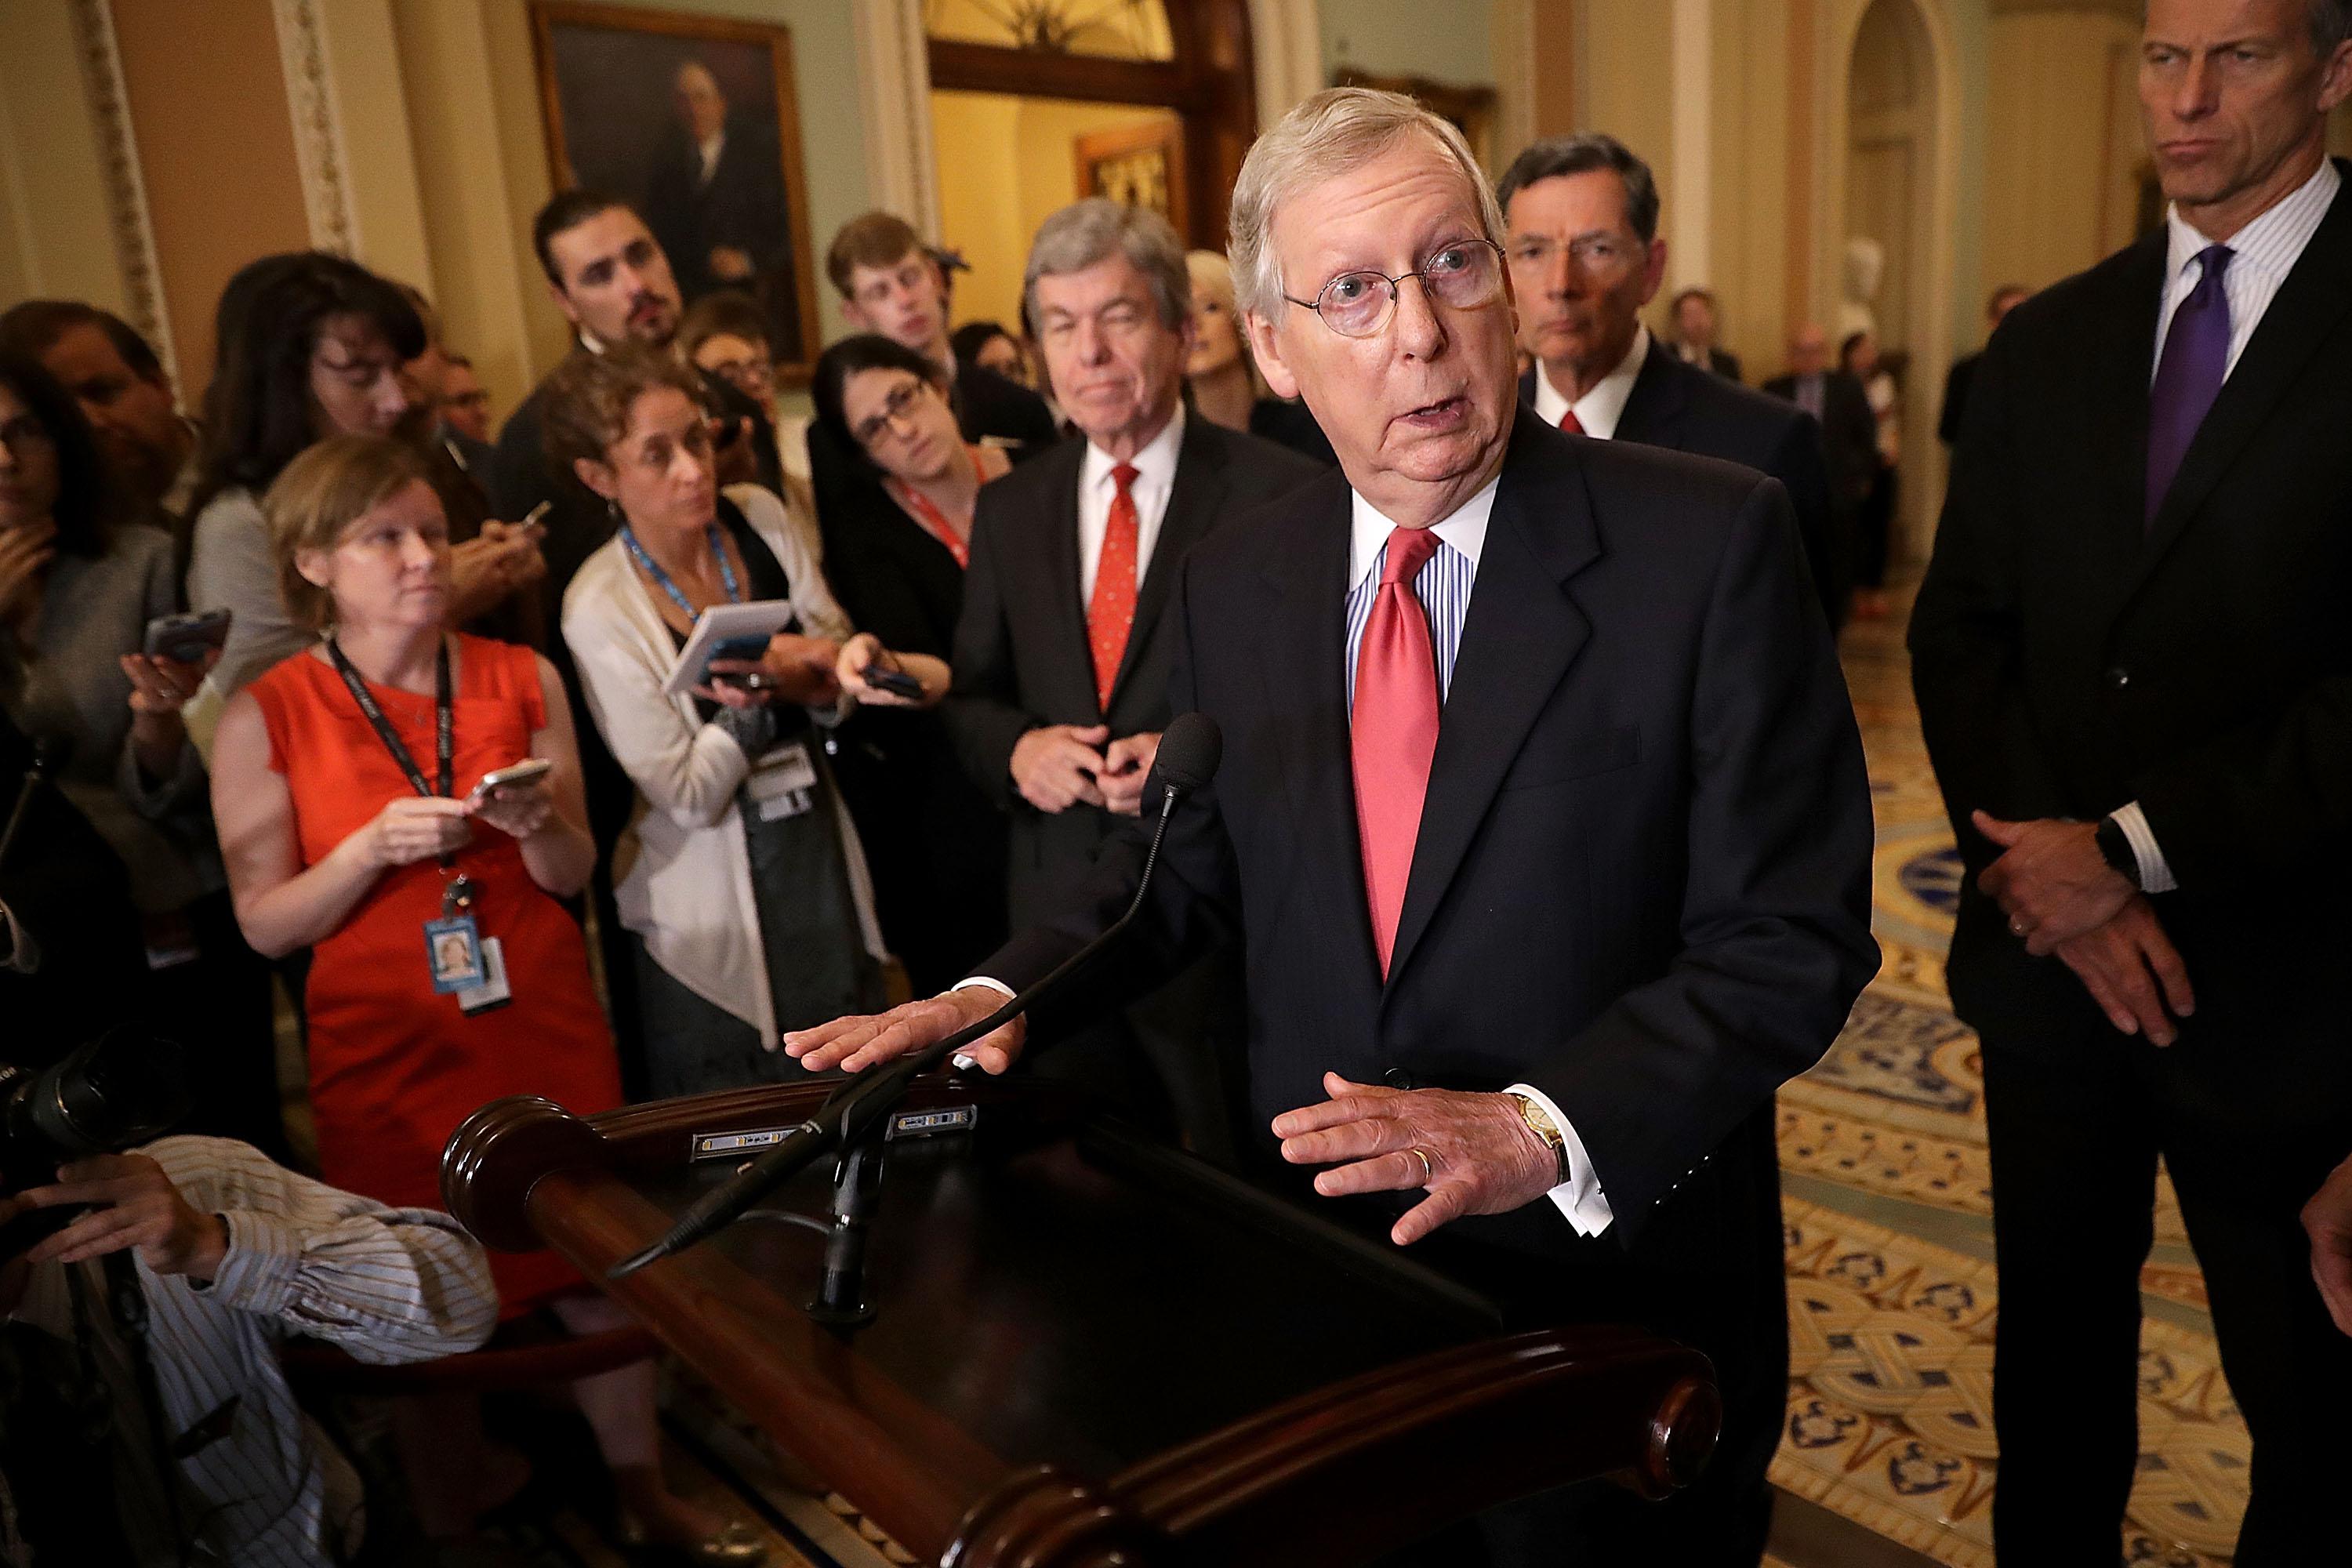 Senate Majority Leader Mitch McConnell speaks to reports.